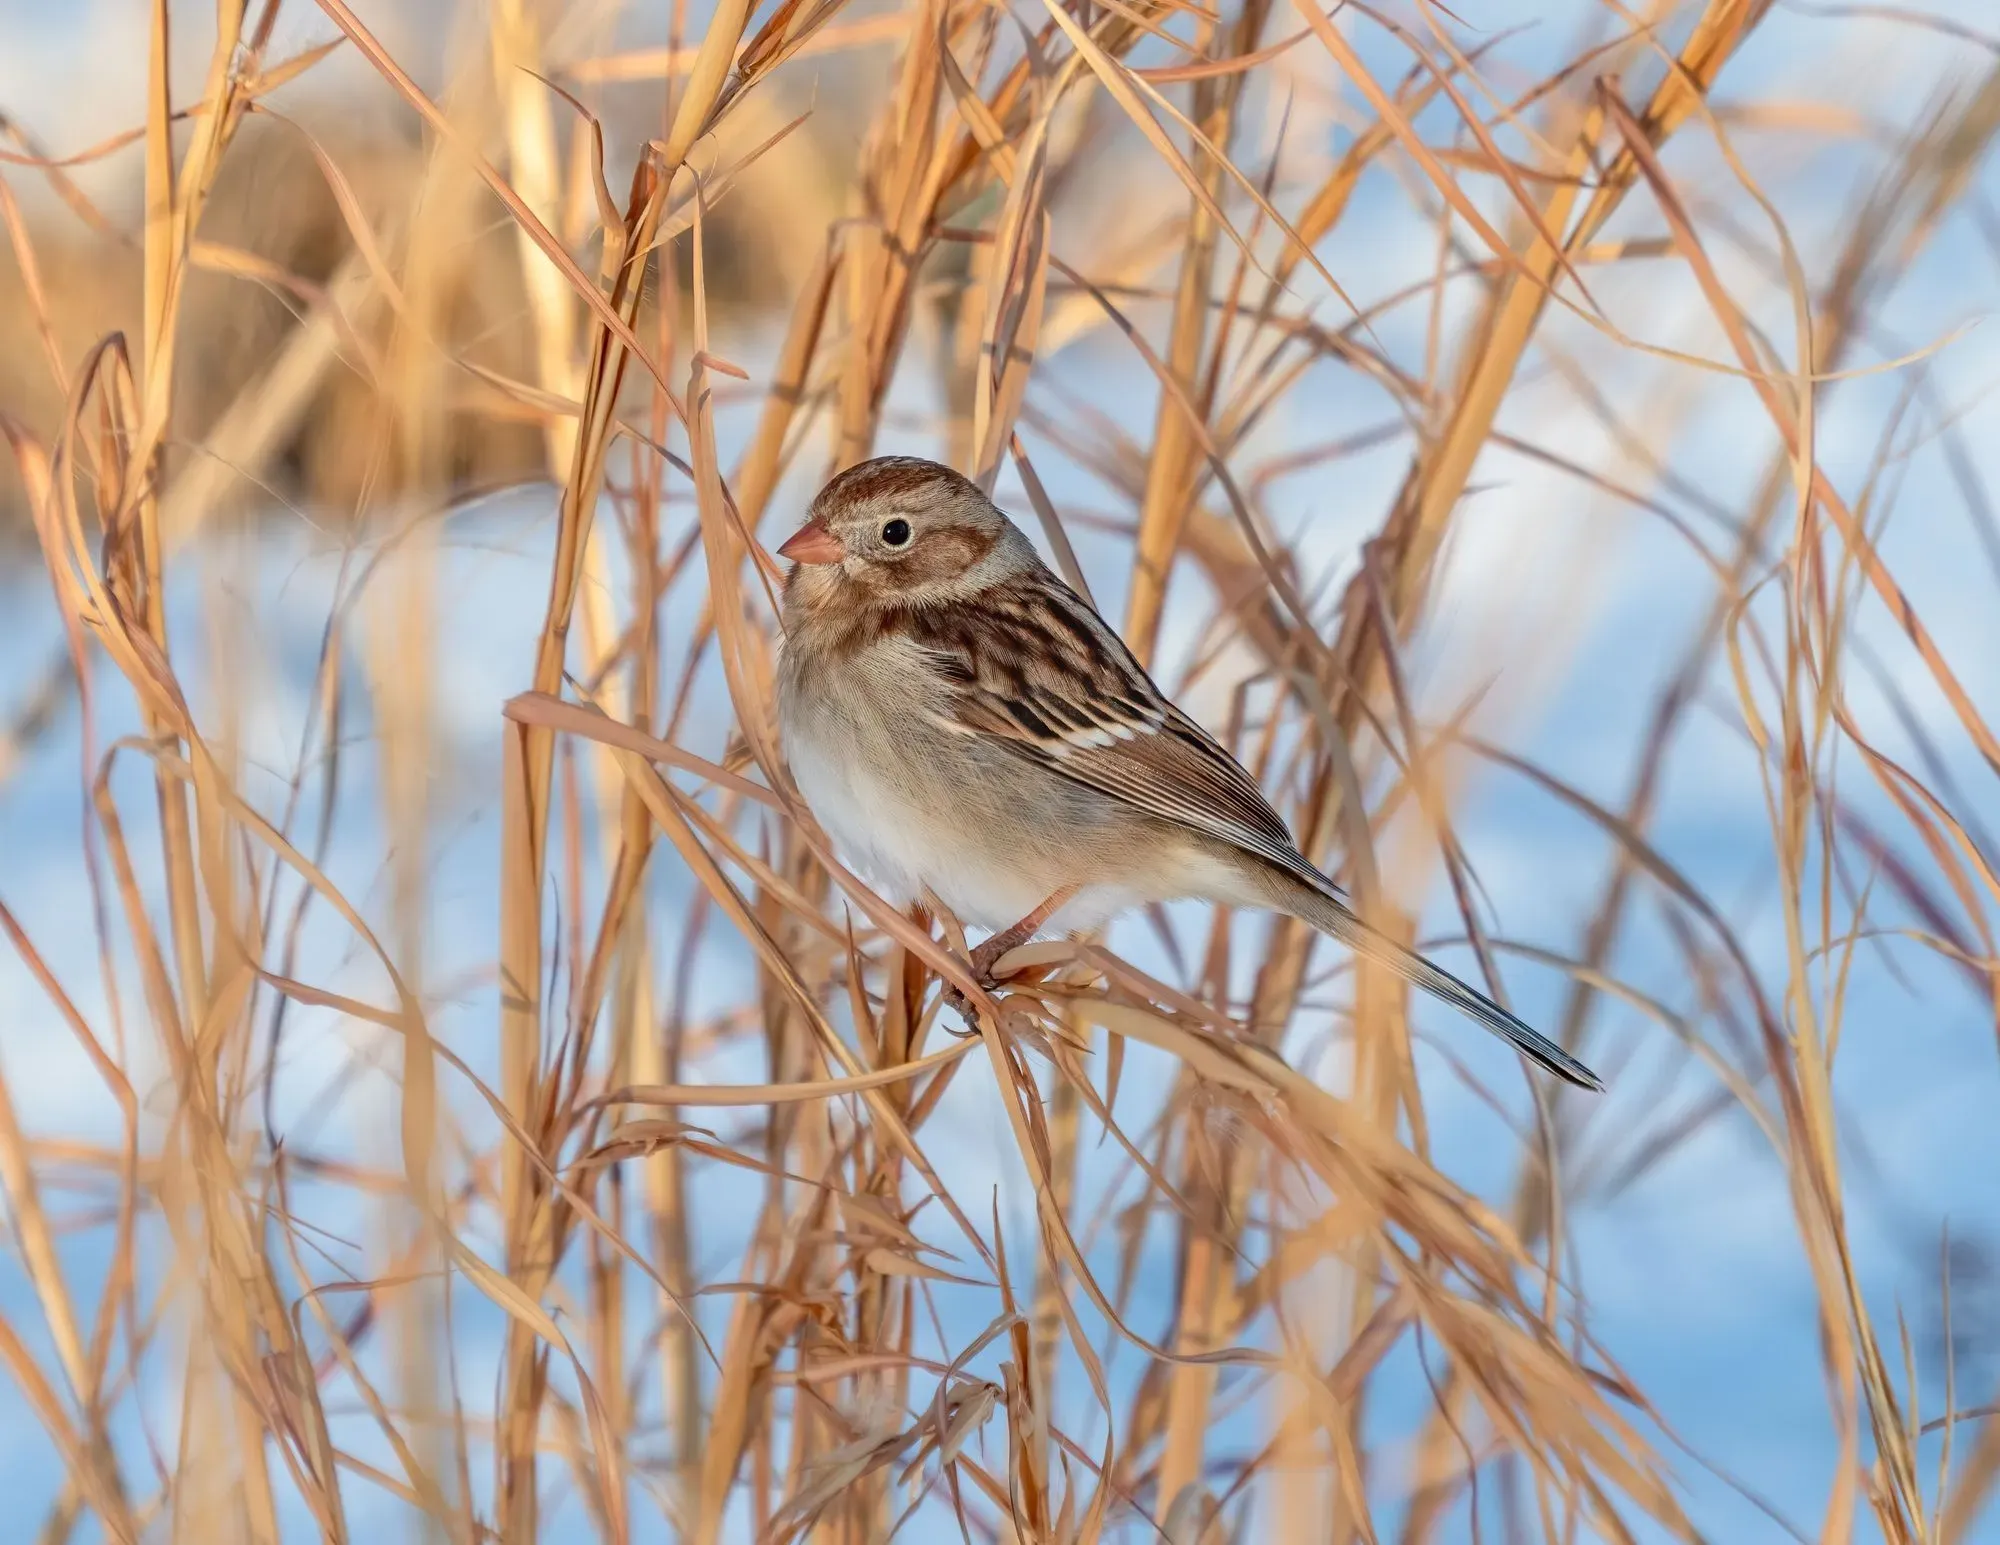 Interesting things you should know about the field sparrow.